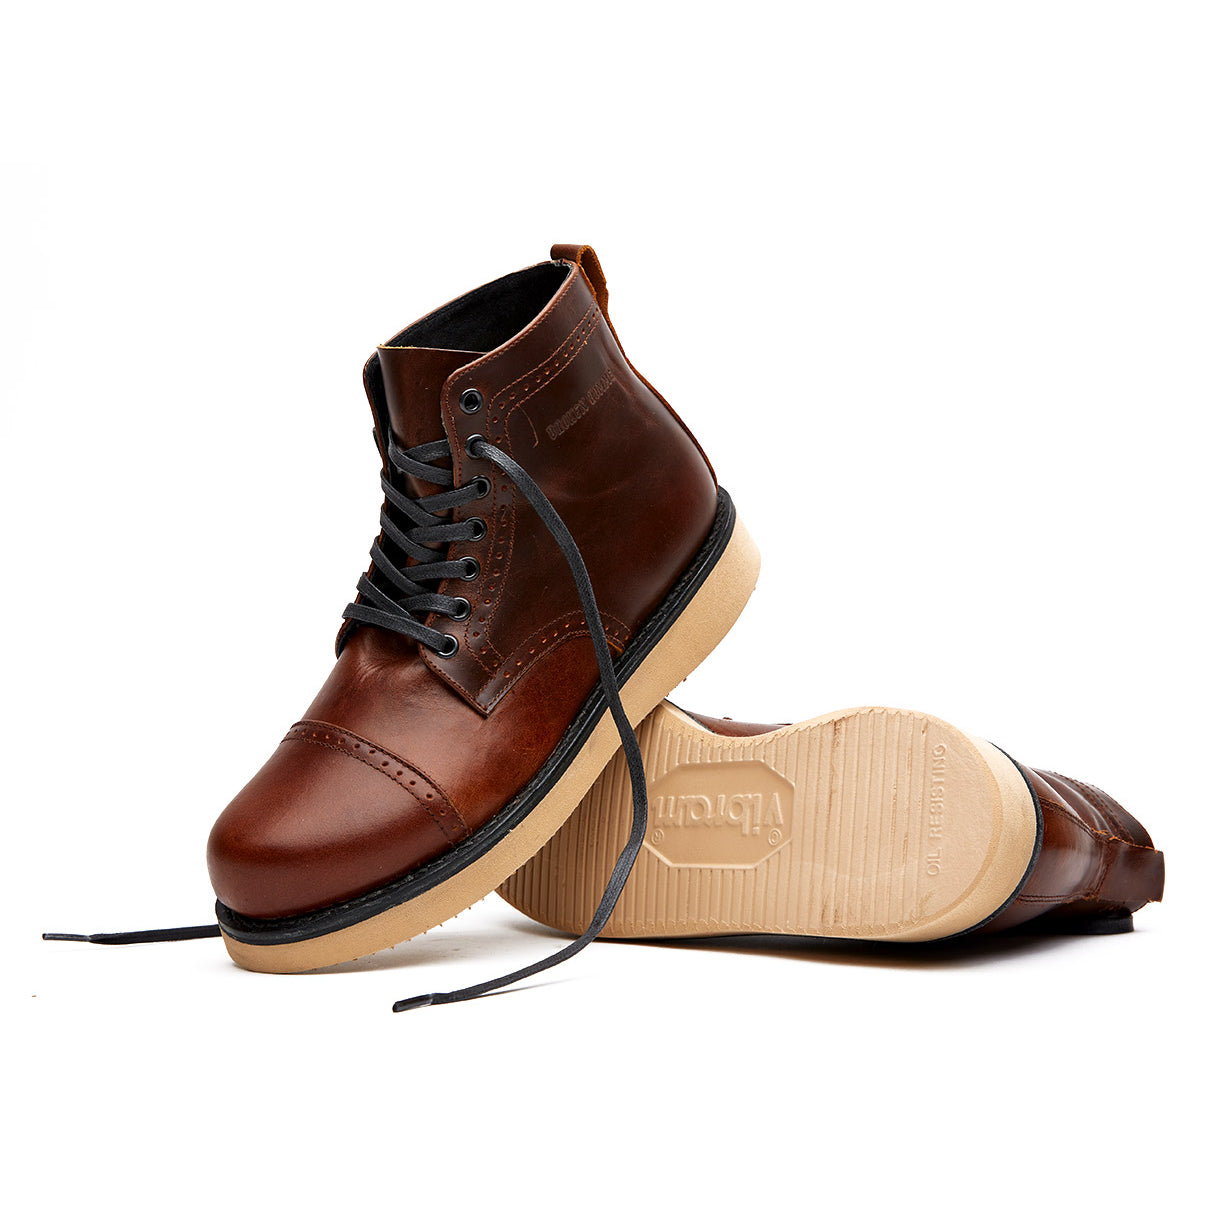 A pair of brown leather Broken Homme Shaun boots on a white background.